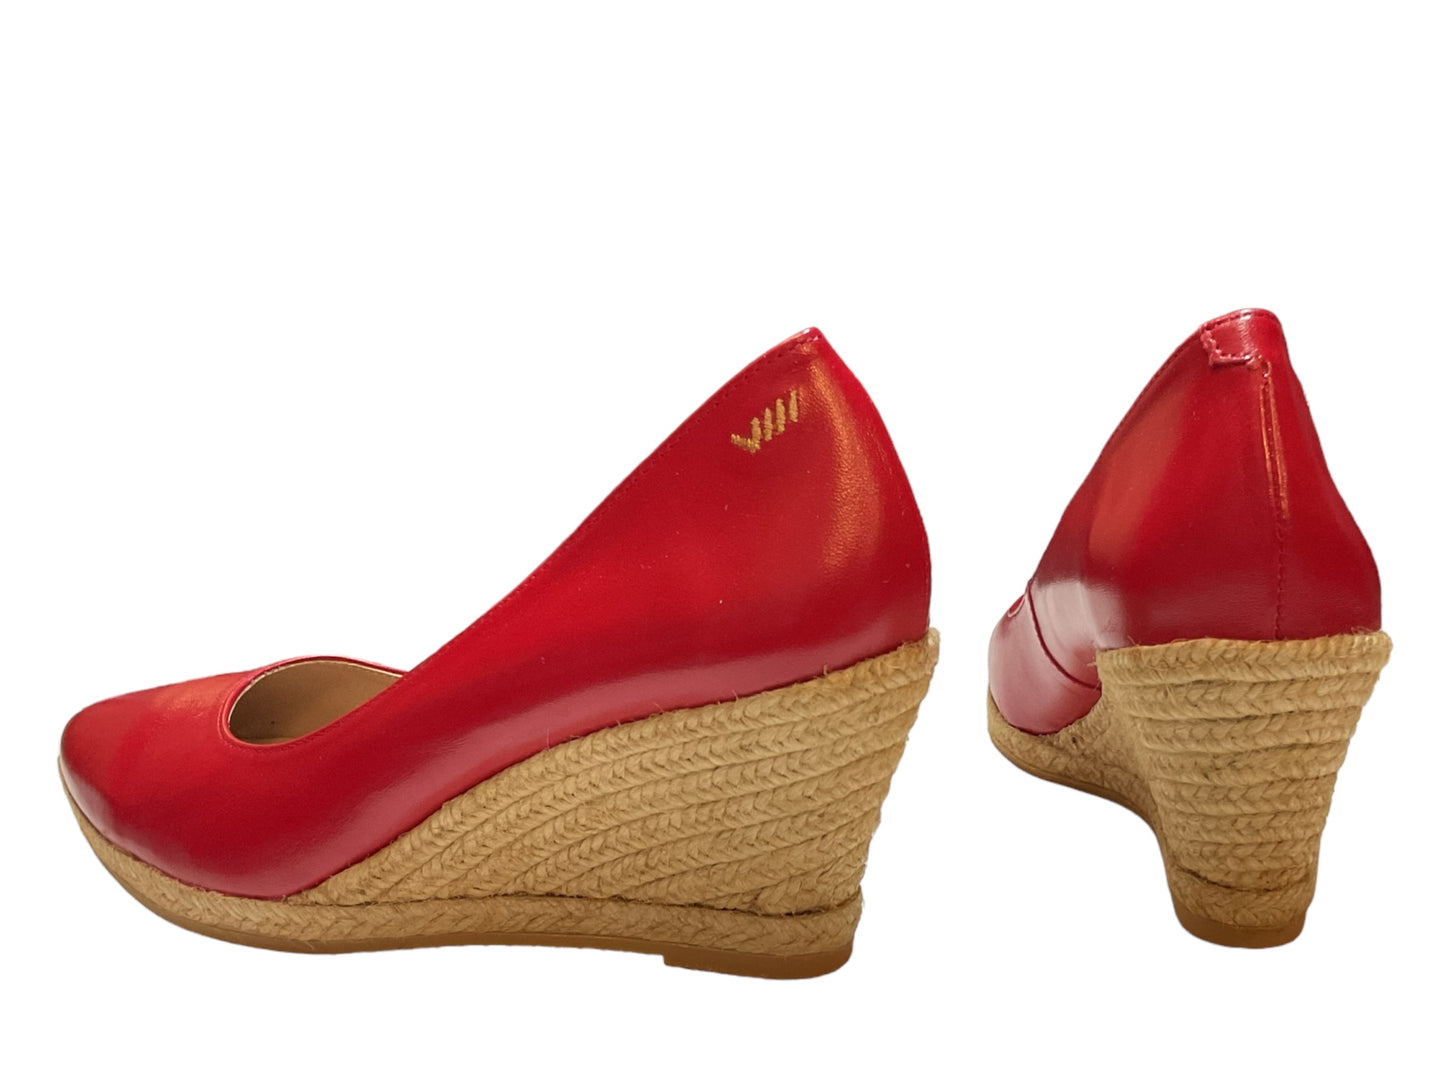 Shoes Heels Wedge By Cma  Size: 9